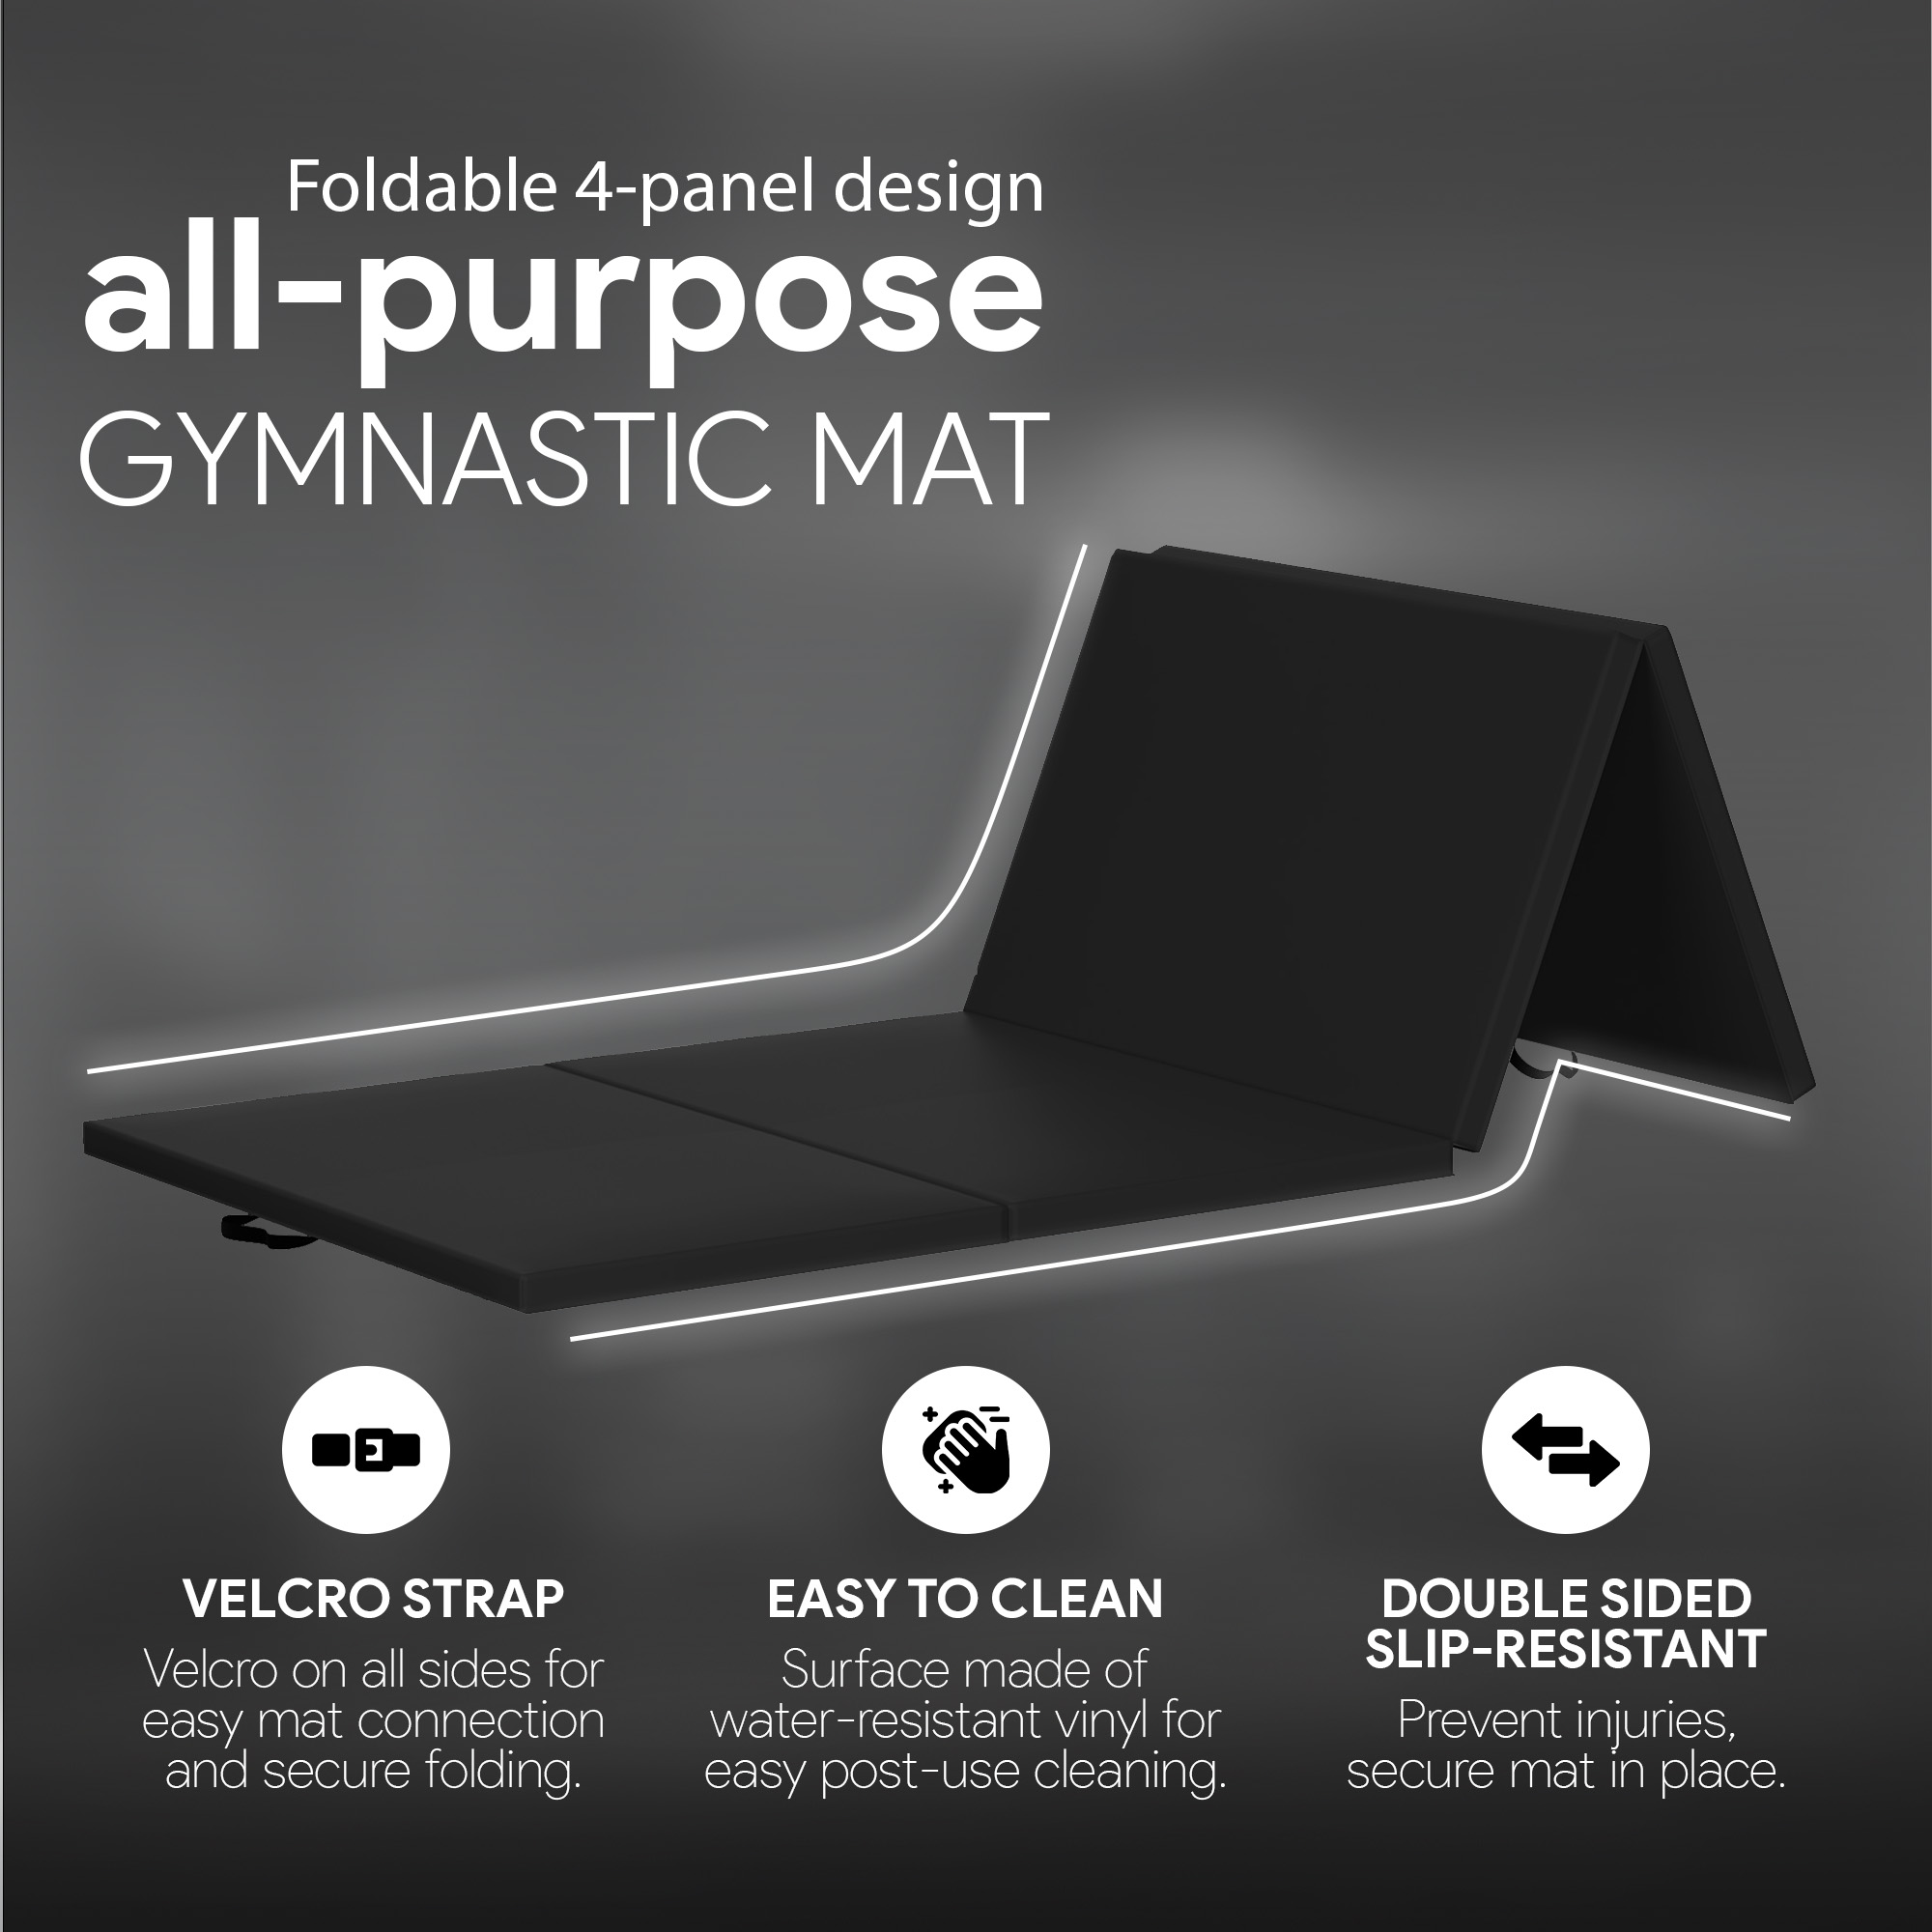 BalanceFrom Fitness 120 x 48" All Purpose Folding Gymnastics Exercise Mat - image 3 of 11